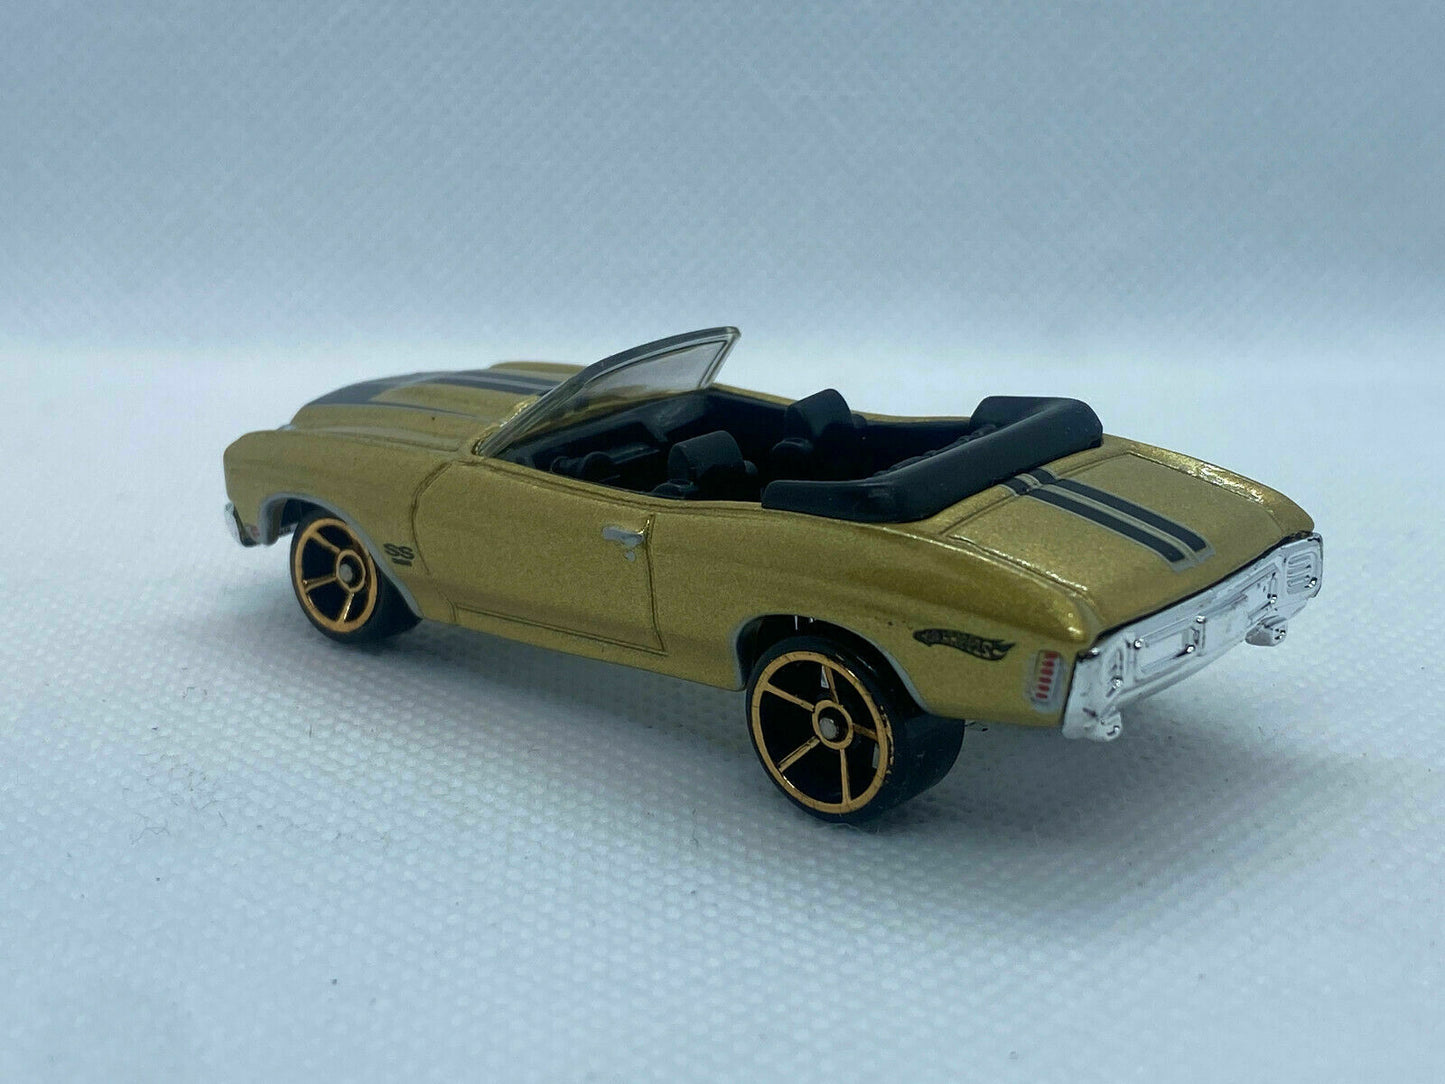 2010 Hot Wheels 1970 Chevorlet Chevelle SS Convertible Loose